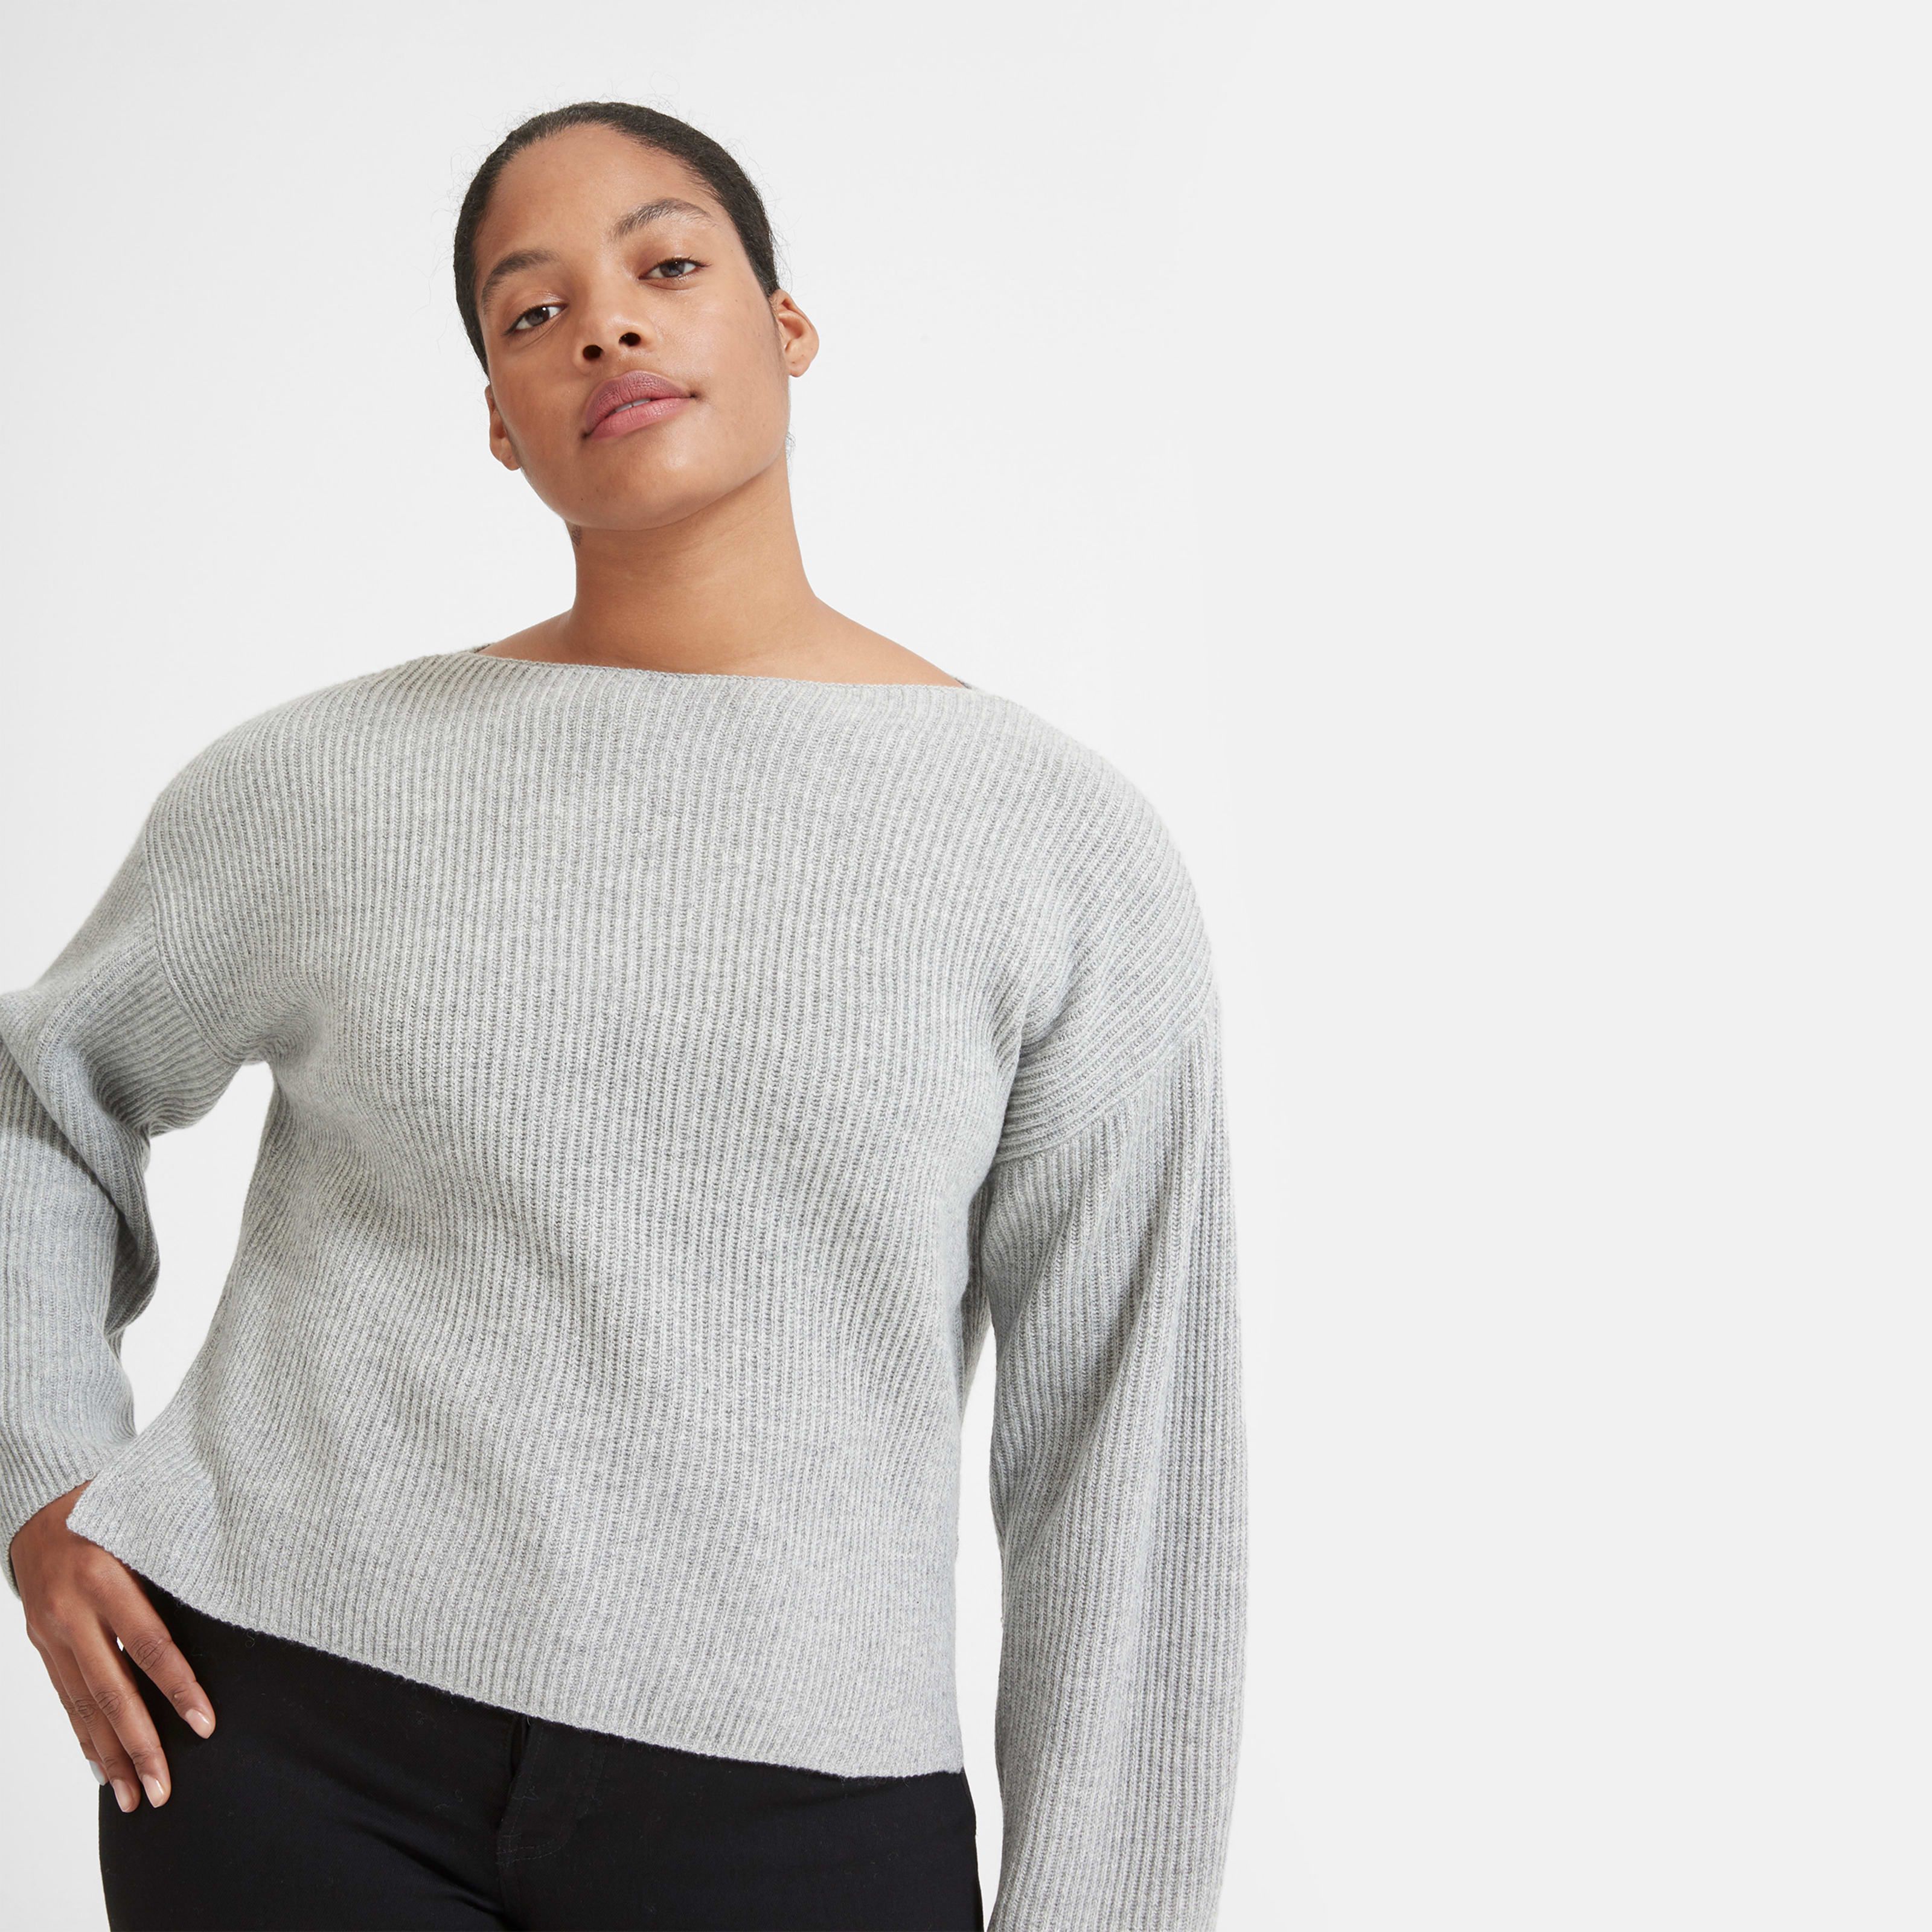 Women's Cashmere Rib Boatneck Sweater by Everlane in Heather Grey, Size S | Everlane